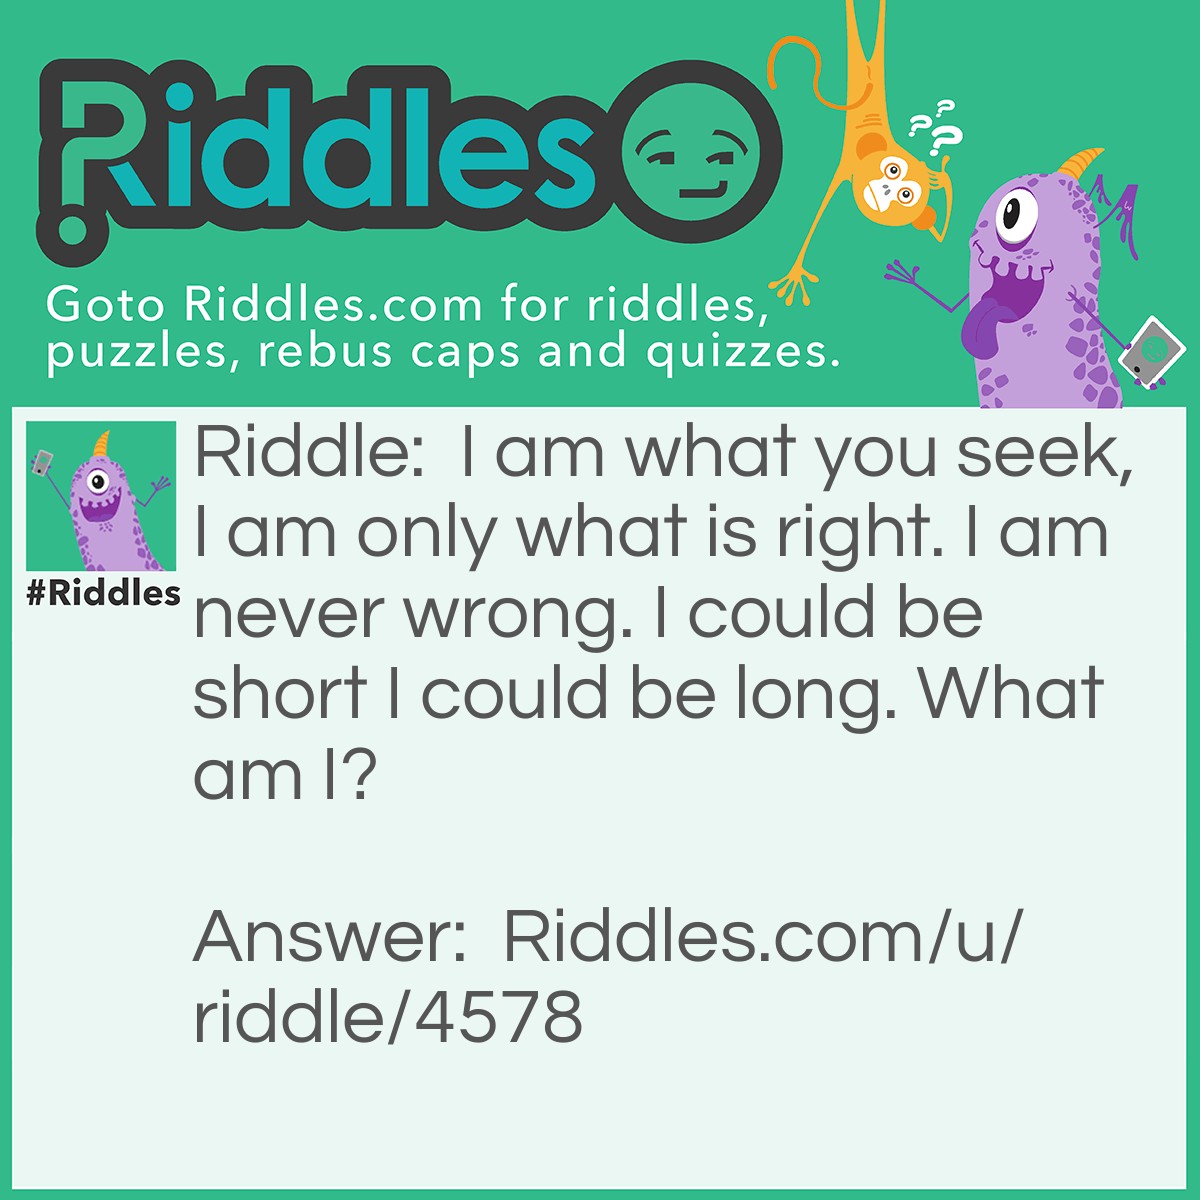 Riddle: I am what you seek, I am only what is right. I am never wrong. I could be short I could be long. What am I? Answer: I am the answer to the question.